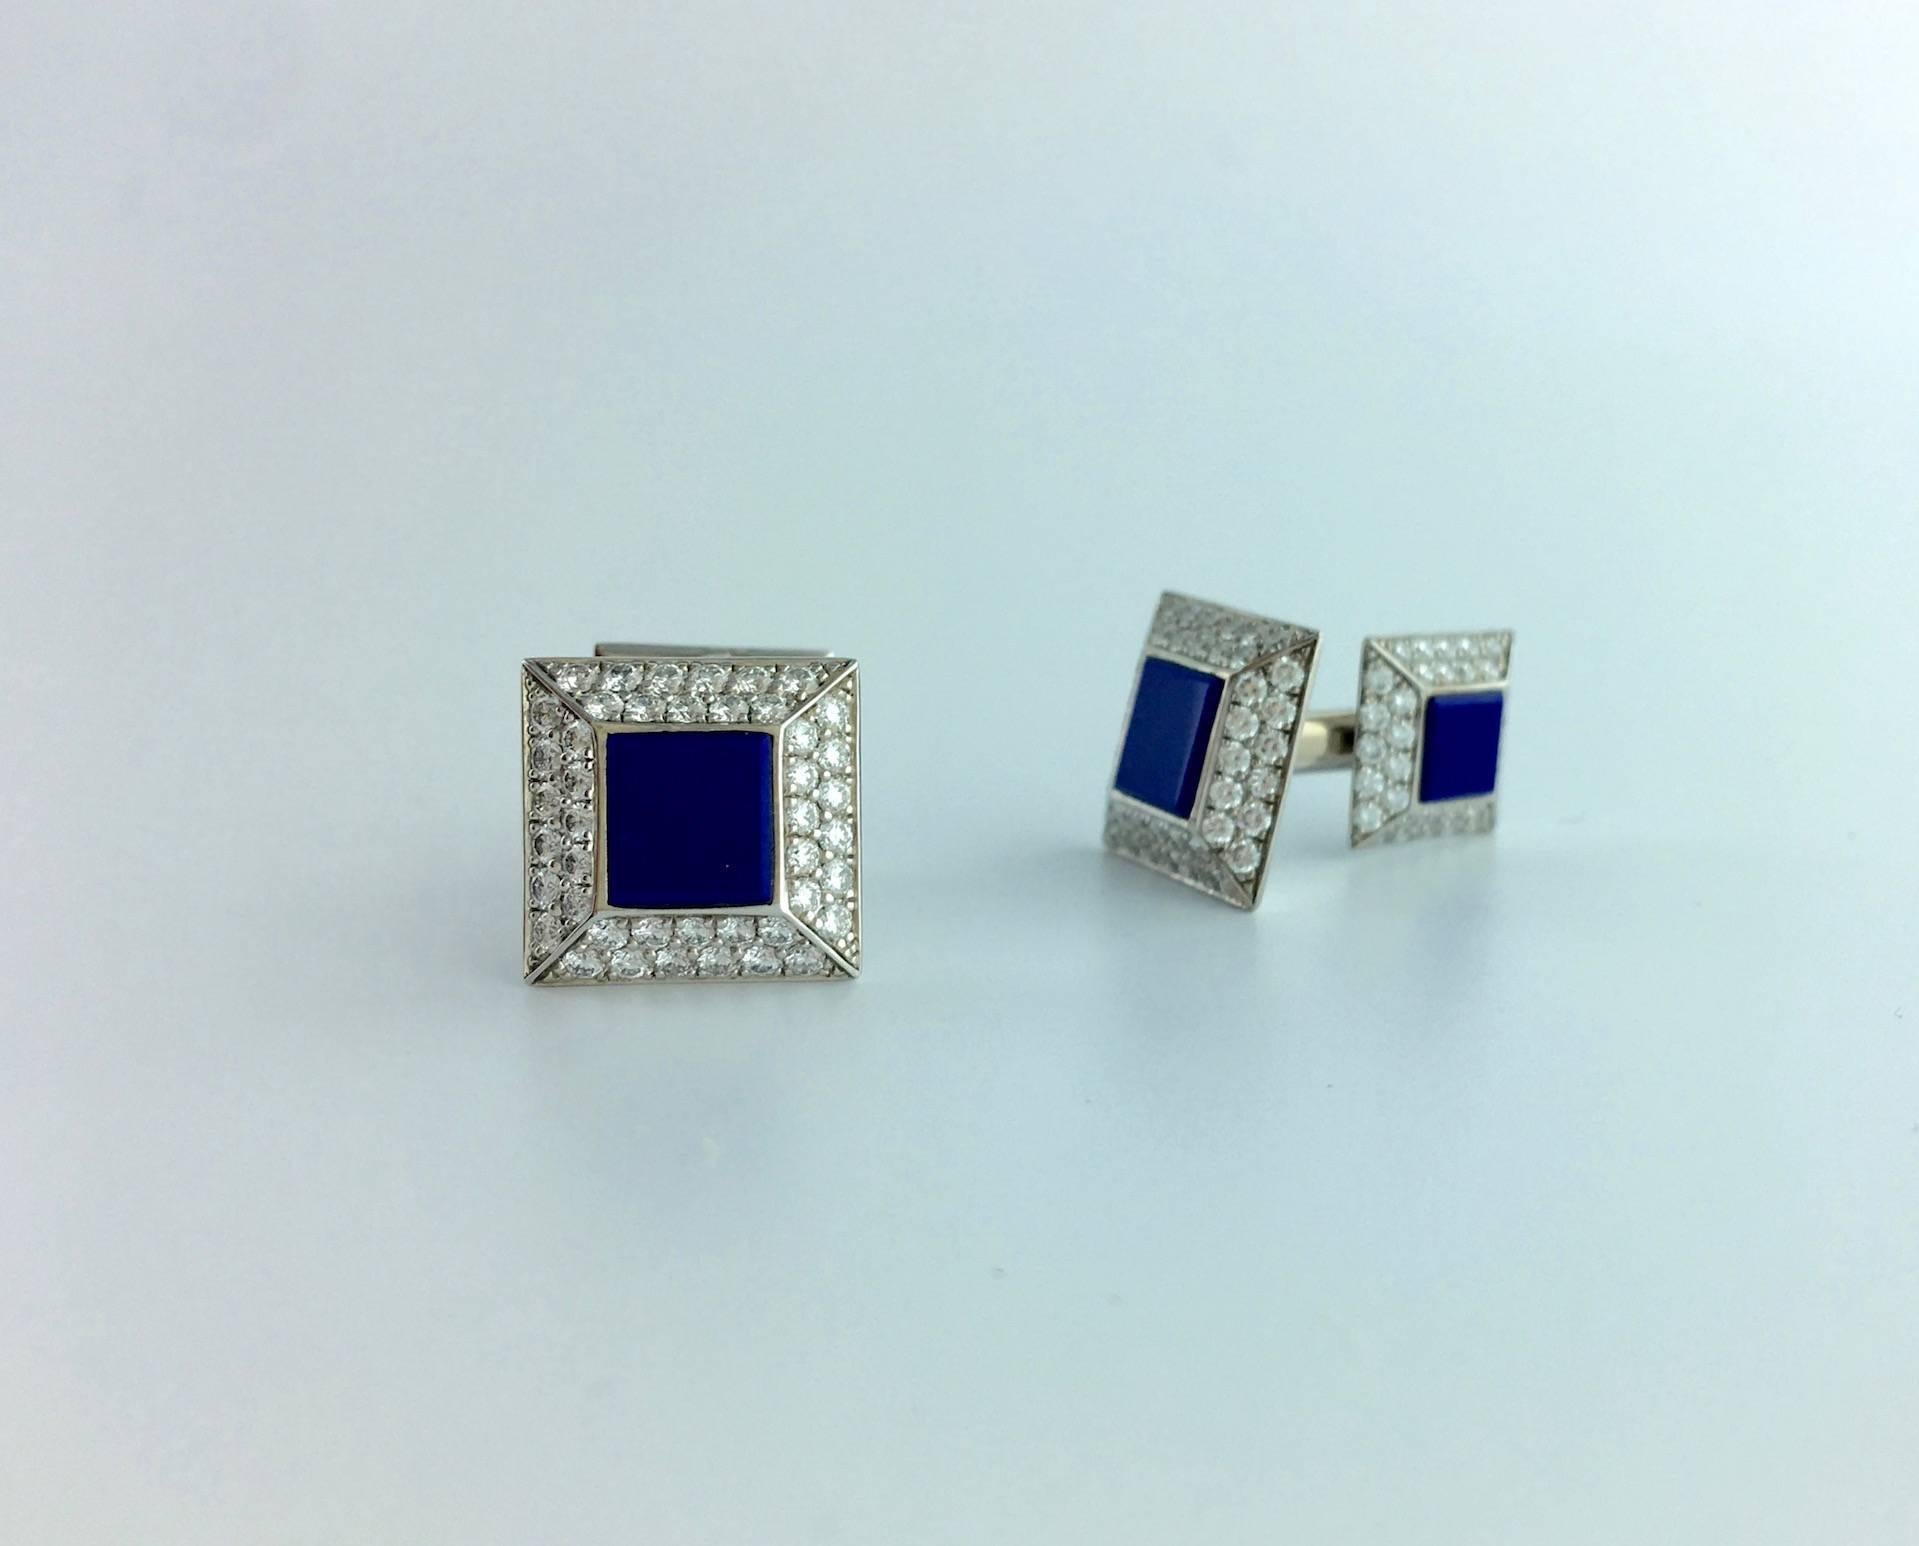 Dazzeling Cufflinks are always the best accessories for Gentlemen.
Each side is centered by a square Lapis Lazuli surrounded by Diamond, all mounted on white gold 18k 750. 
Contemporary.

Gross weight: 14.29 grams.